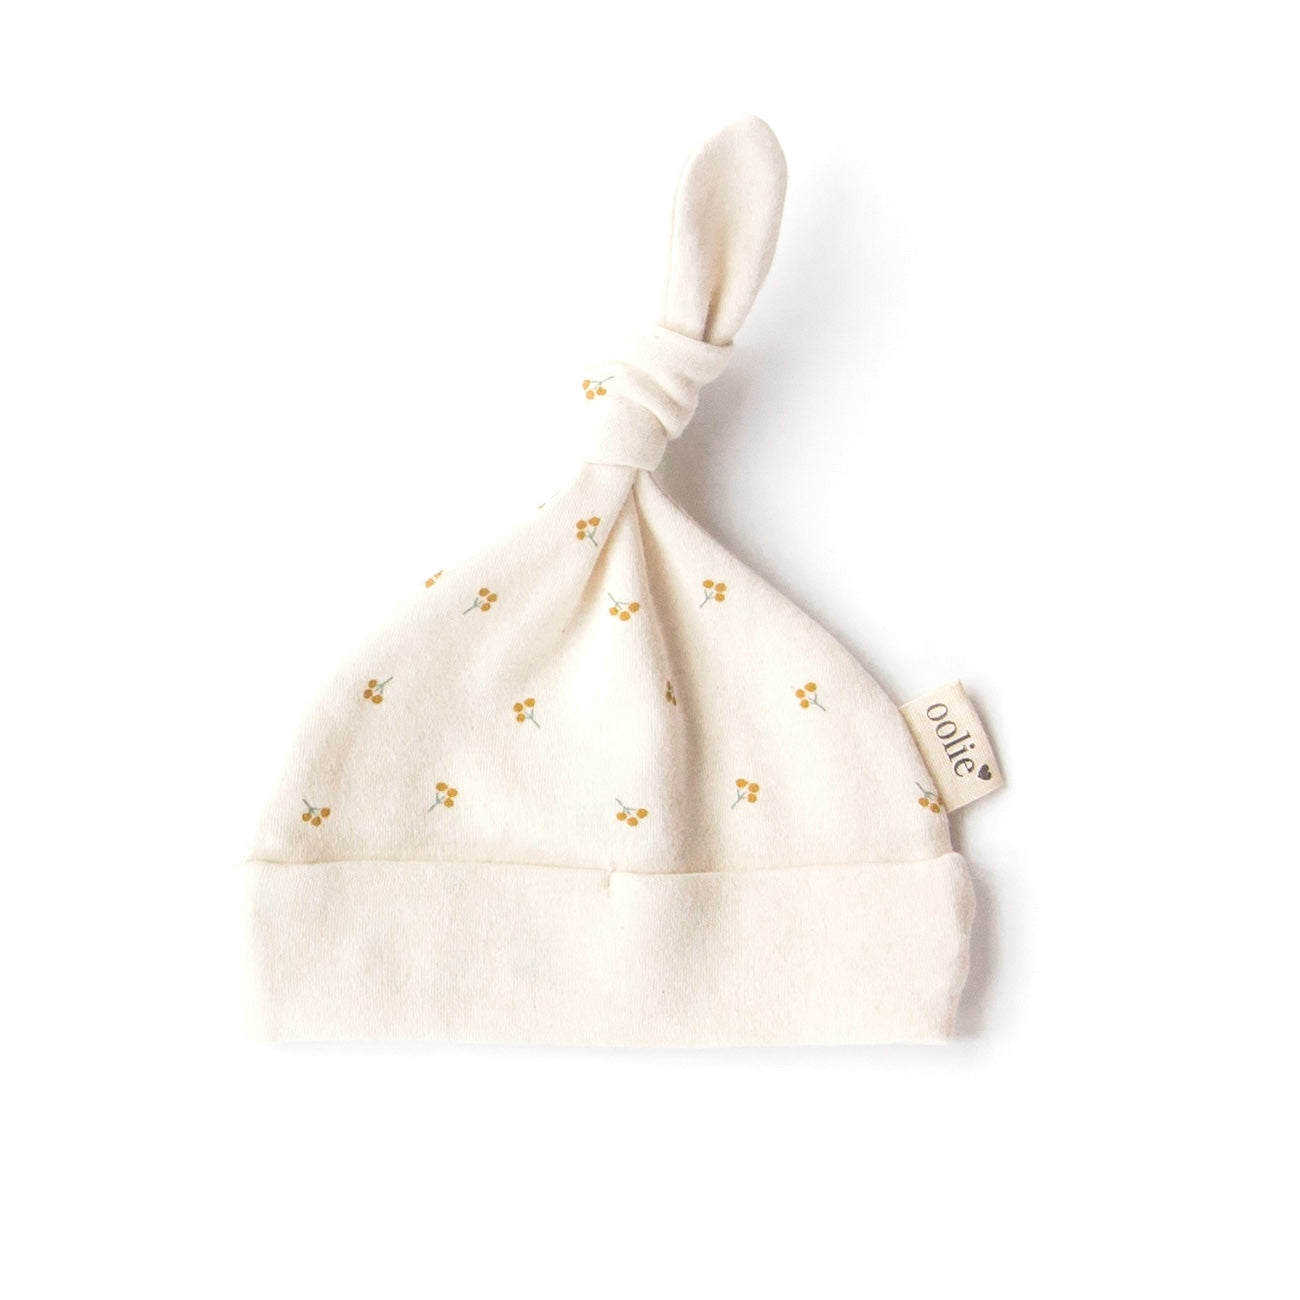 An Oolie organic cotton top knot baby hat with the gold sprig print, a natural color with small sprigs of golden berries.